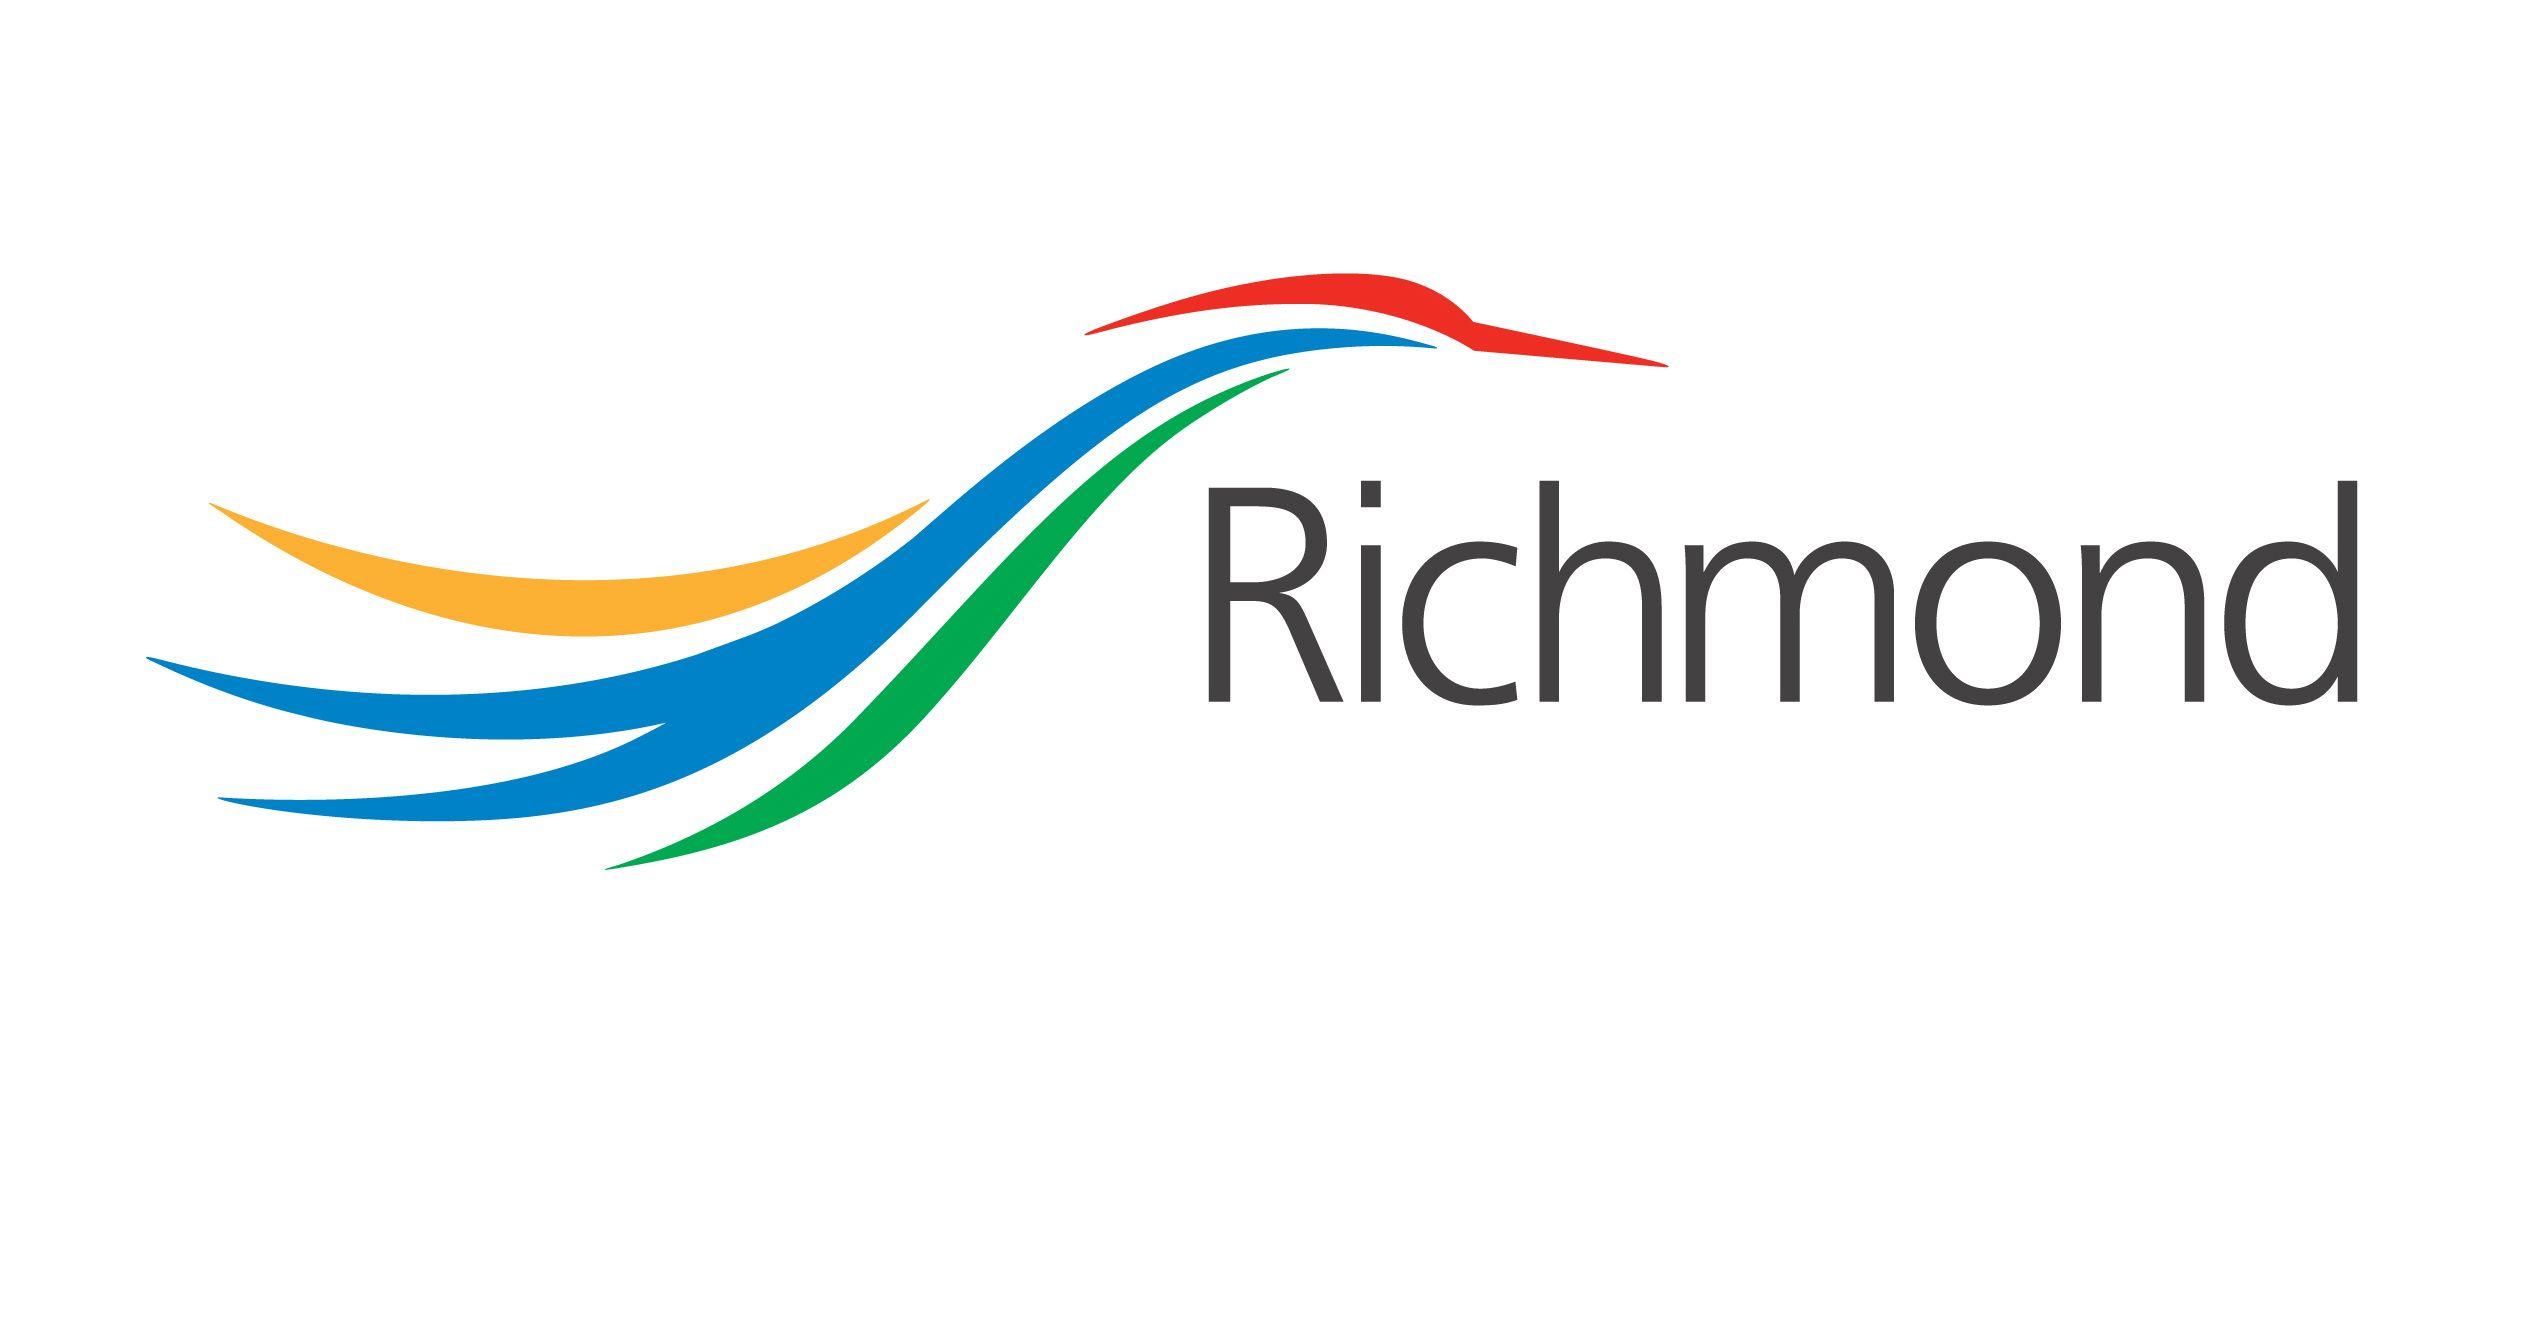 City of Richmond Logo - City of Richmond logo - Family Services of Greater Vancouver (FSGV)